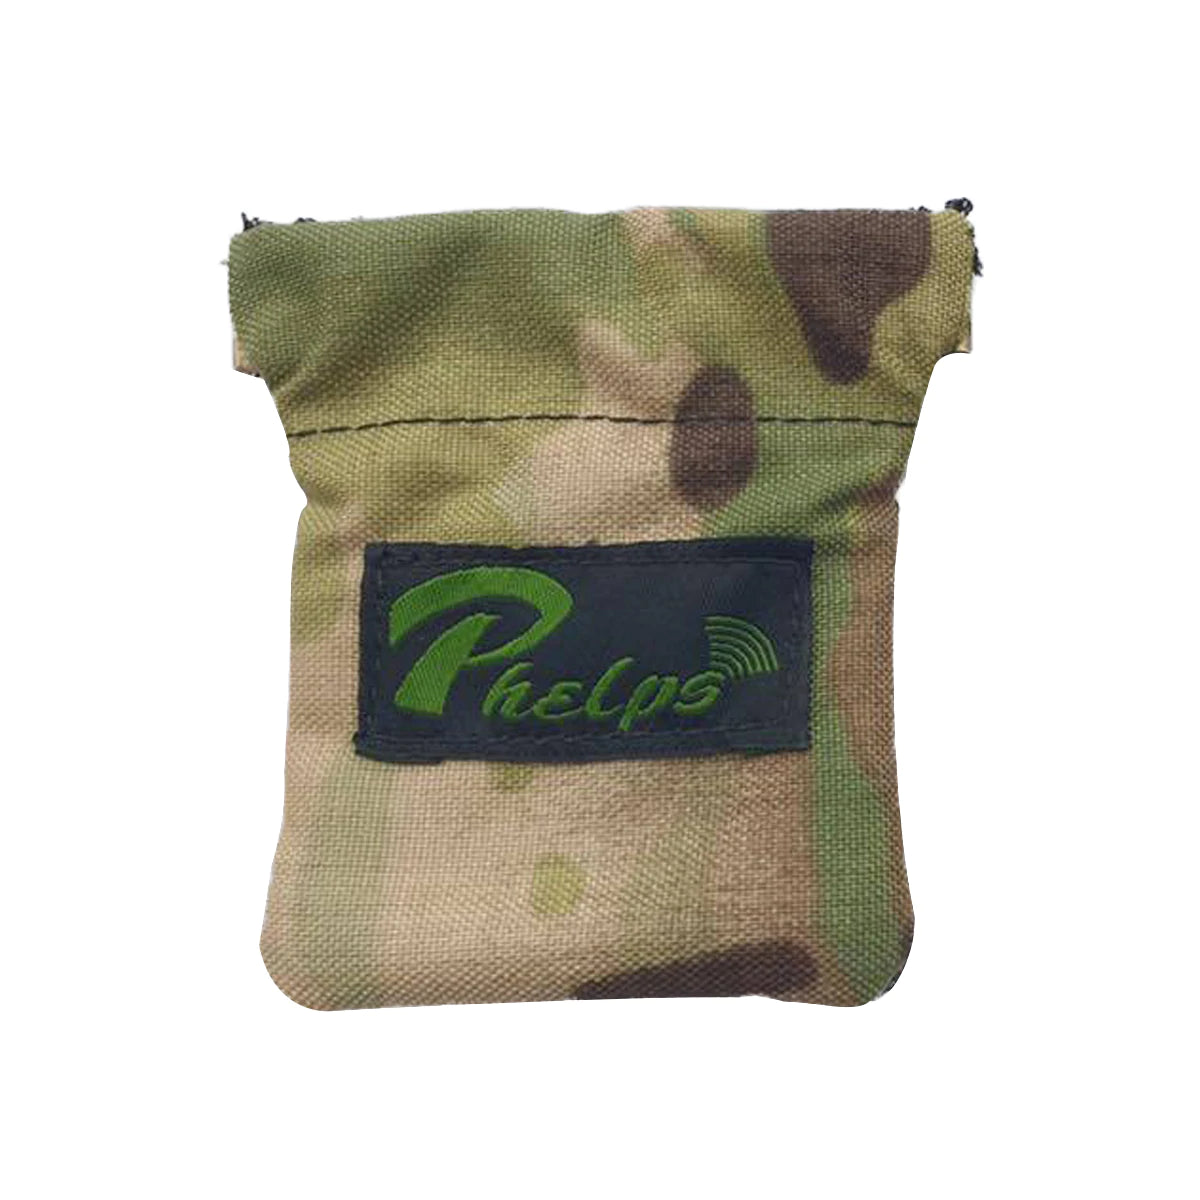 Phelps SQUEEZE CALL POUCH Game Call Pouch (Multicam skin)